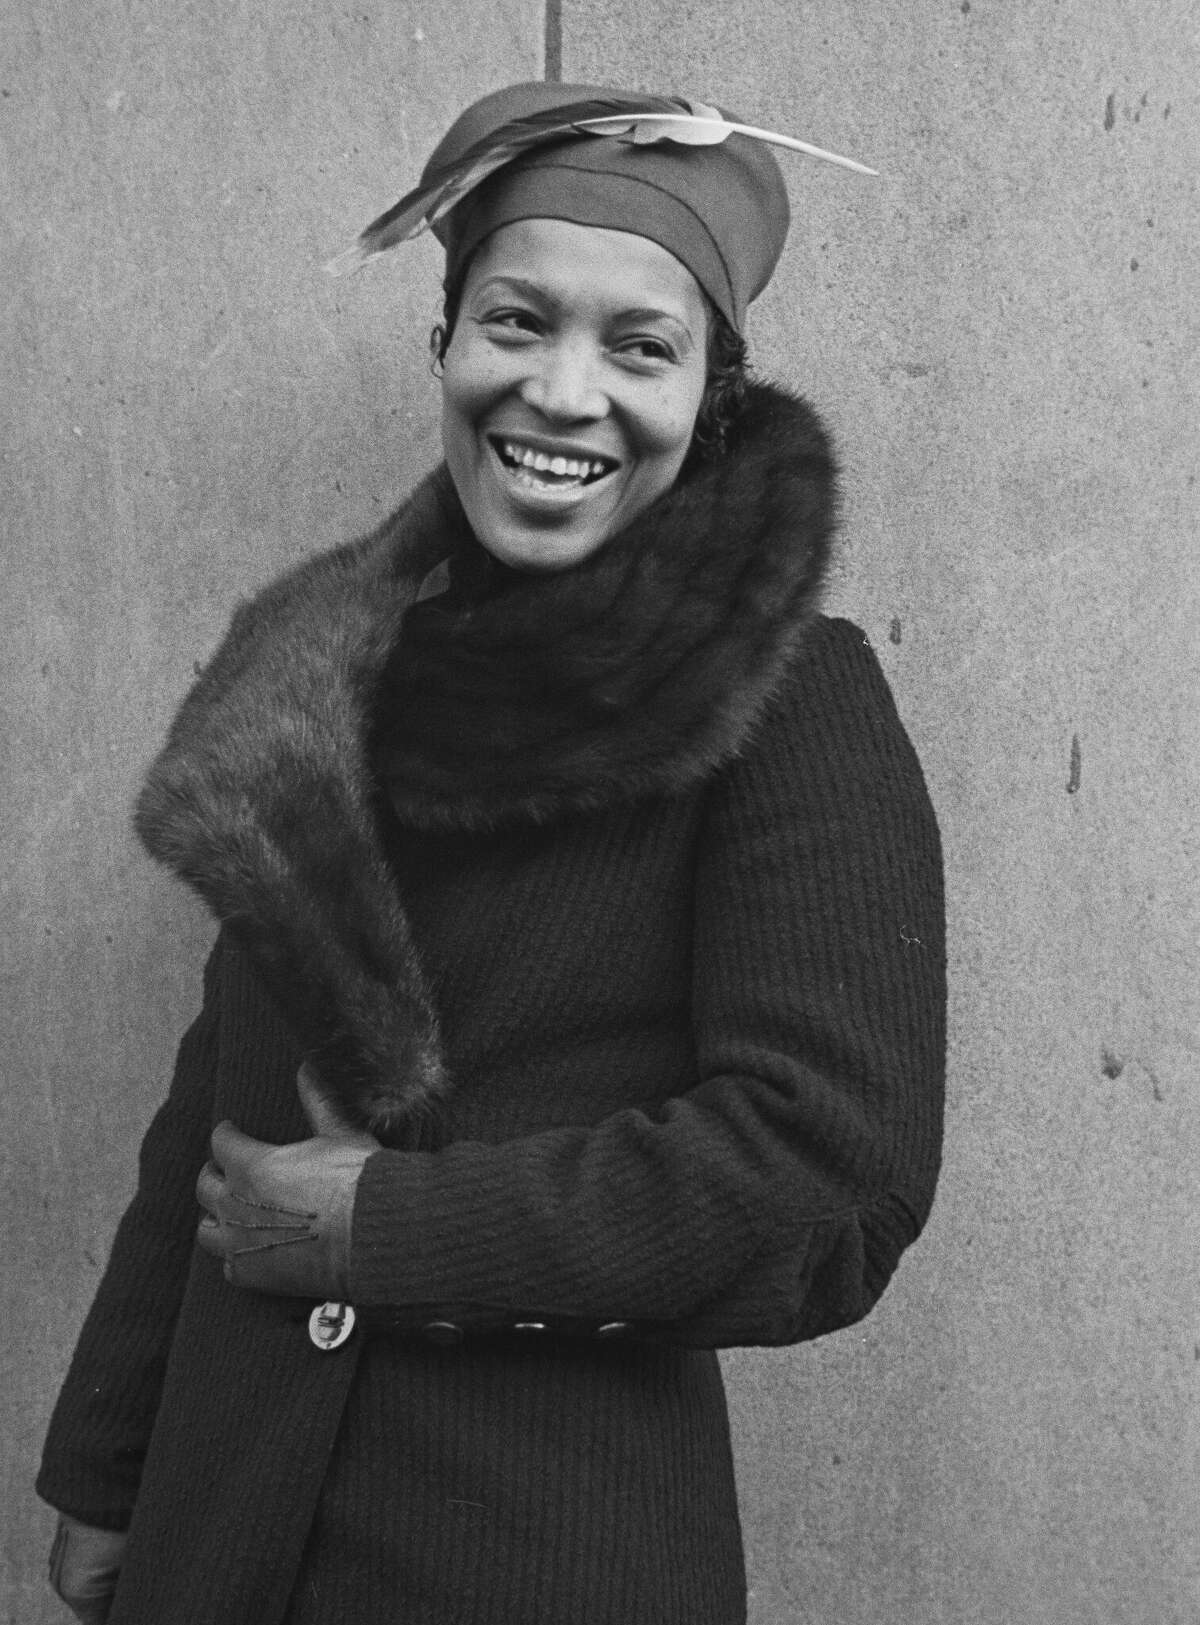 Zora Neale Hurston was a friend of Carl Van Vechten, a famous photographer during the Harlem Renaissance, who took this portrait on November 9, 1934.